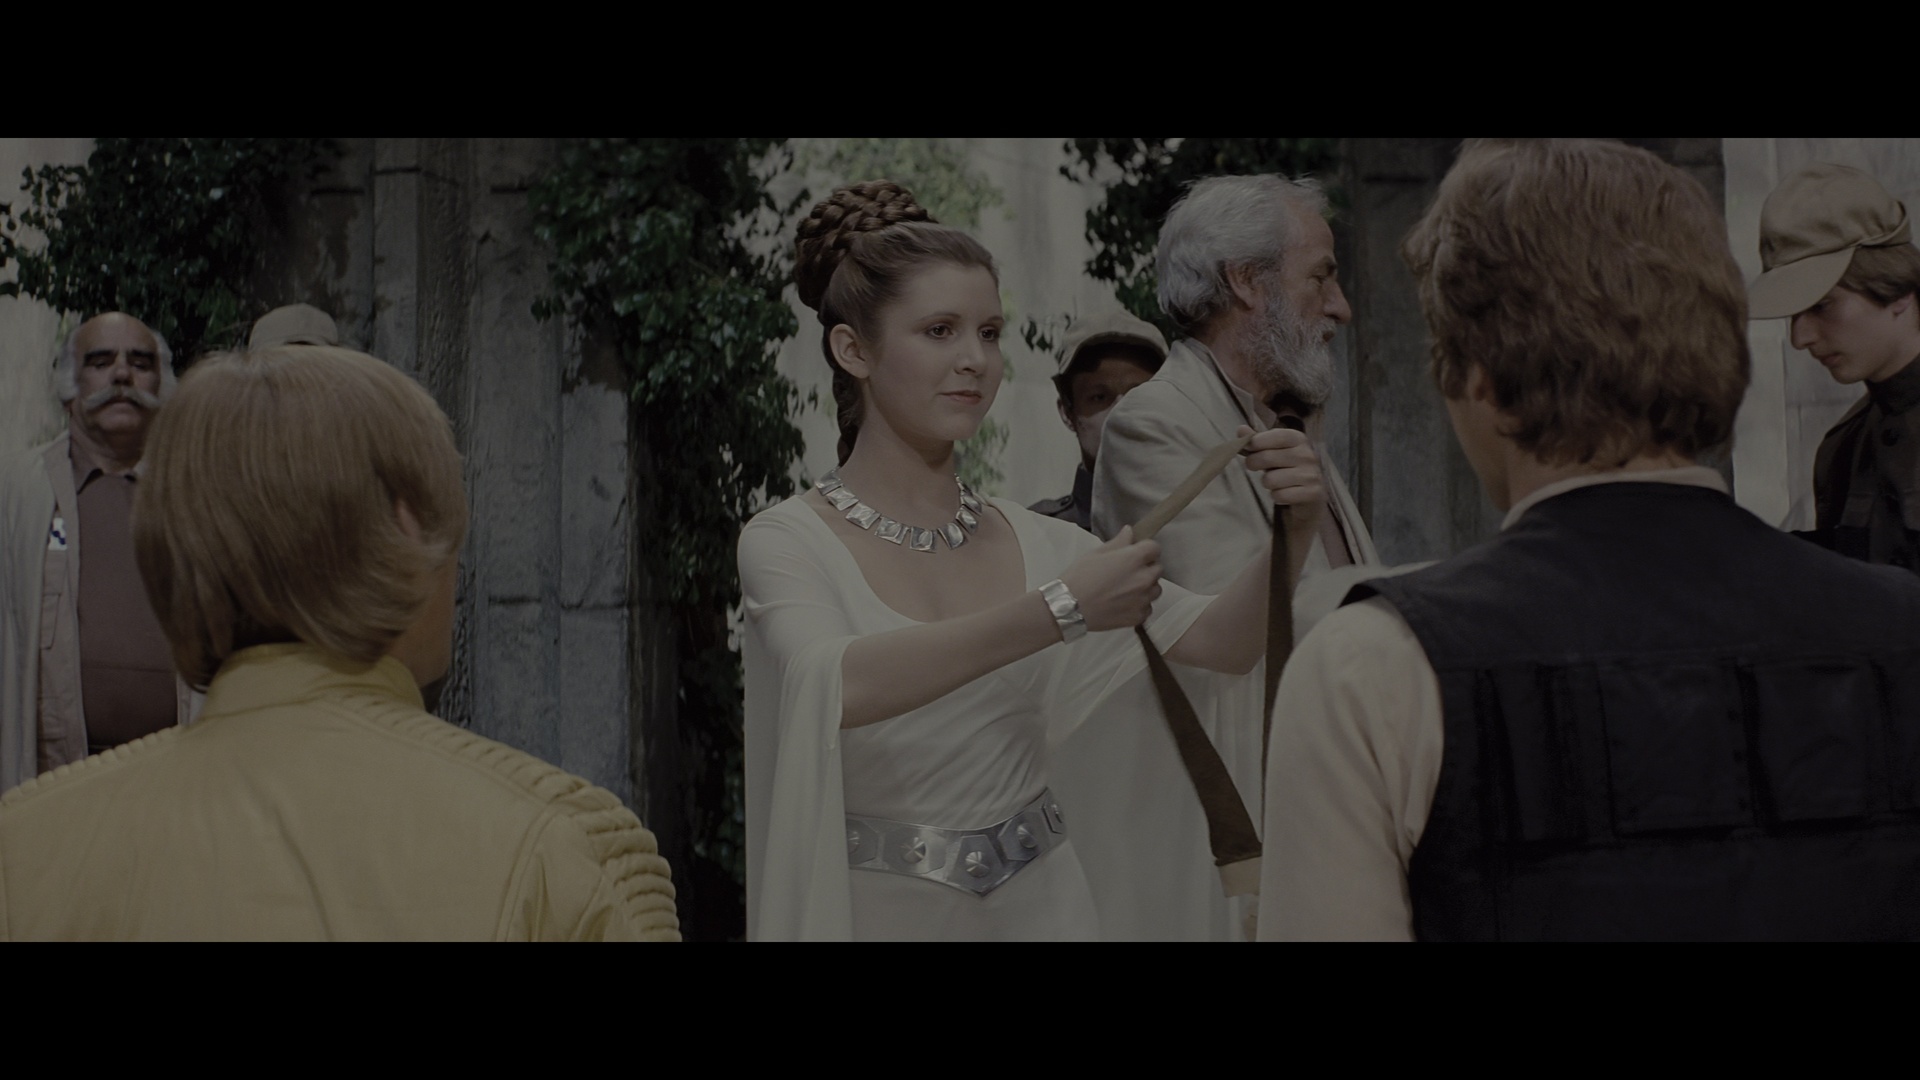 STAR WARS: A NEW HOPE (1977) - Princess Leia's (Carrie Fisher) Screen-Matched Ceremonial Dress - Image 34 of 39